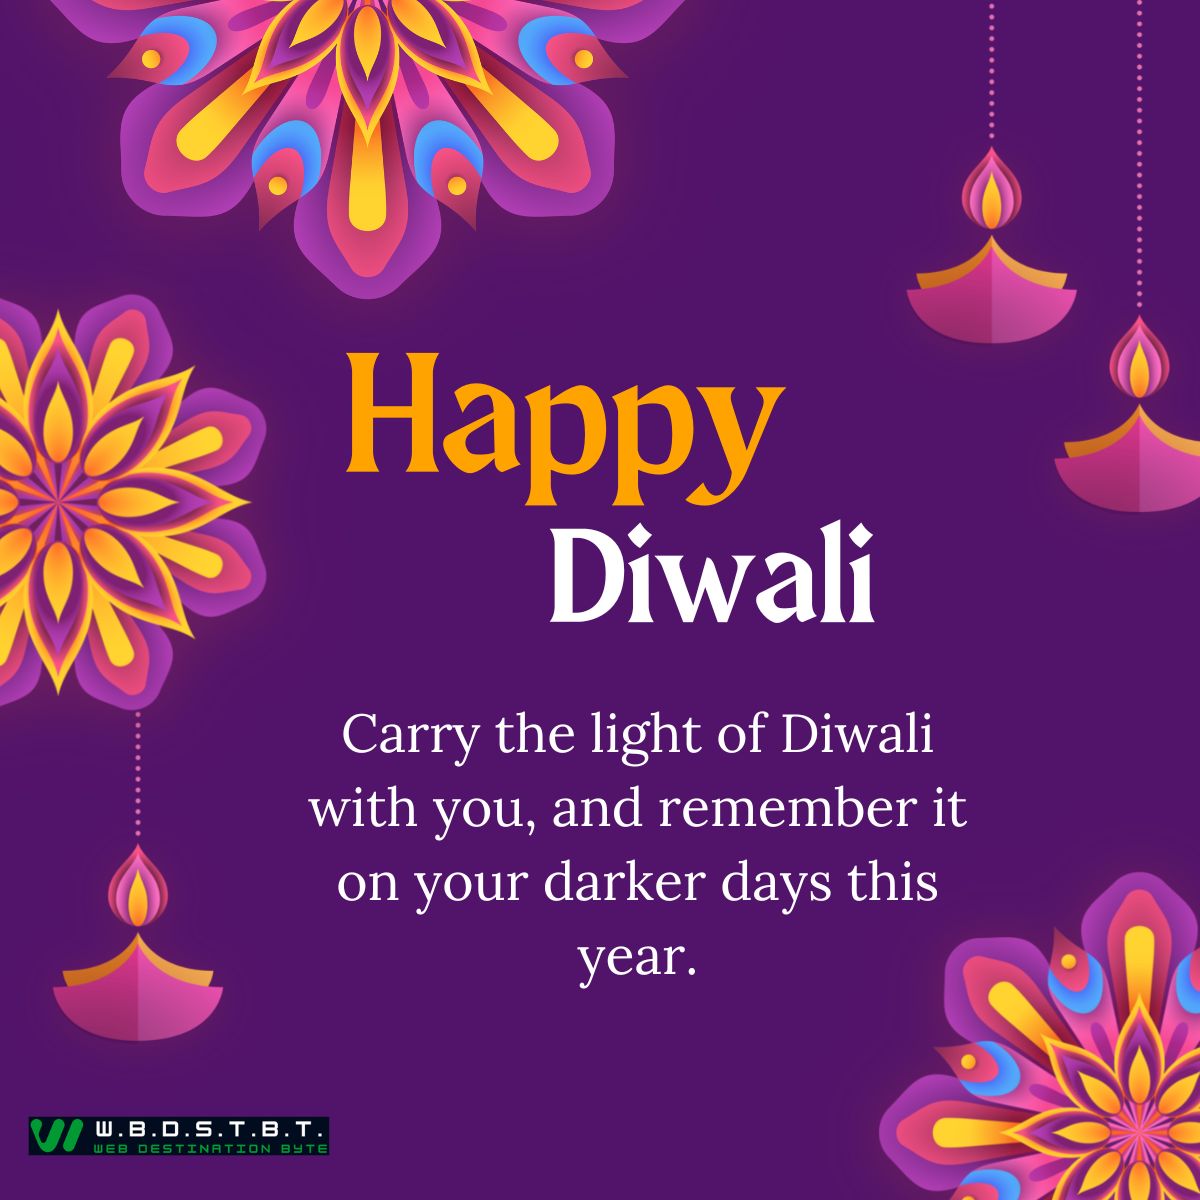 Carry the light of Diwali with you, and remember it on your darker days this year.